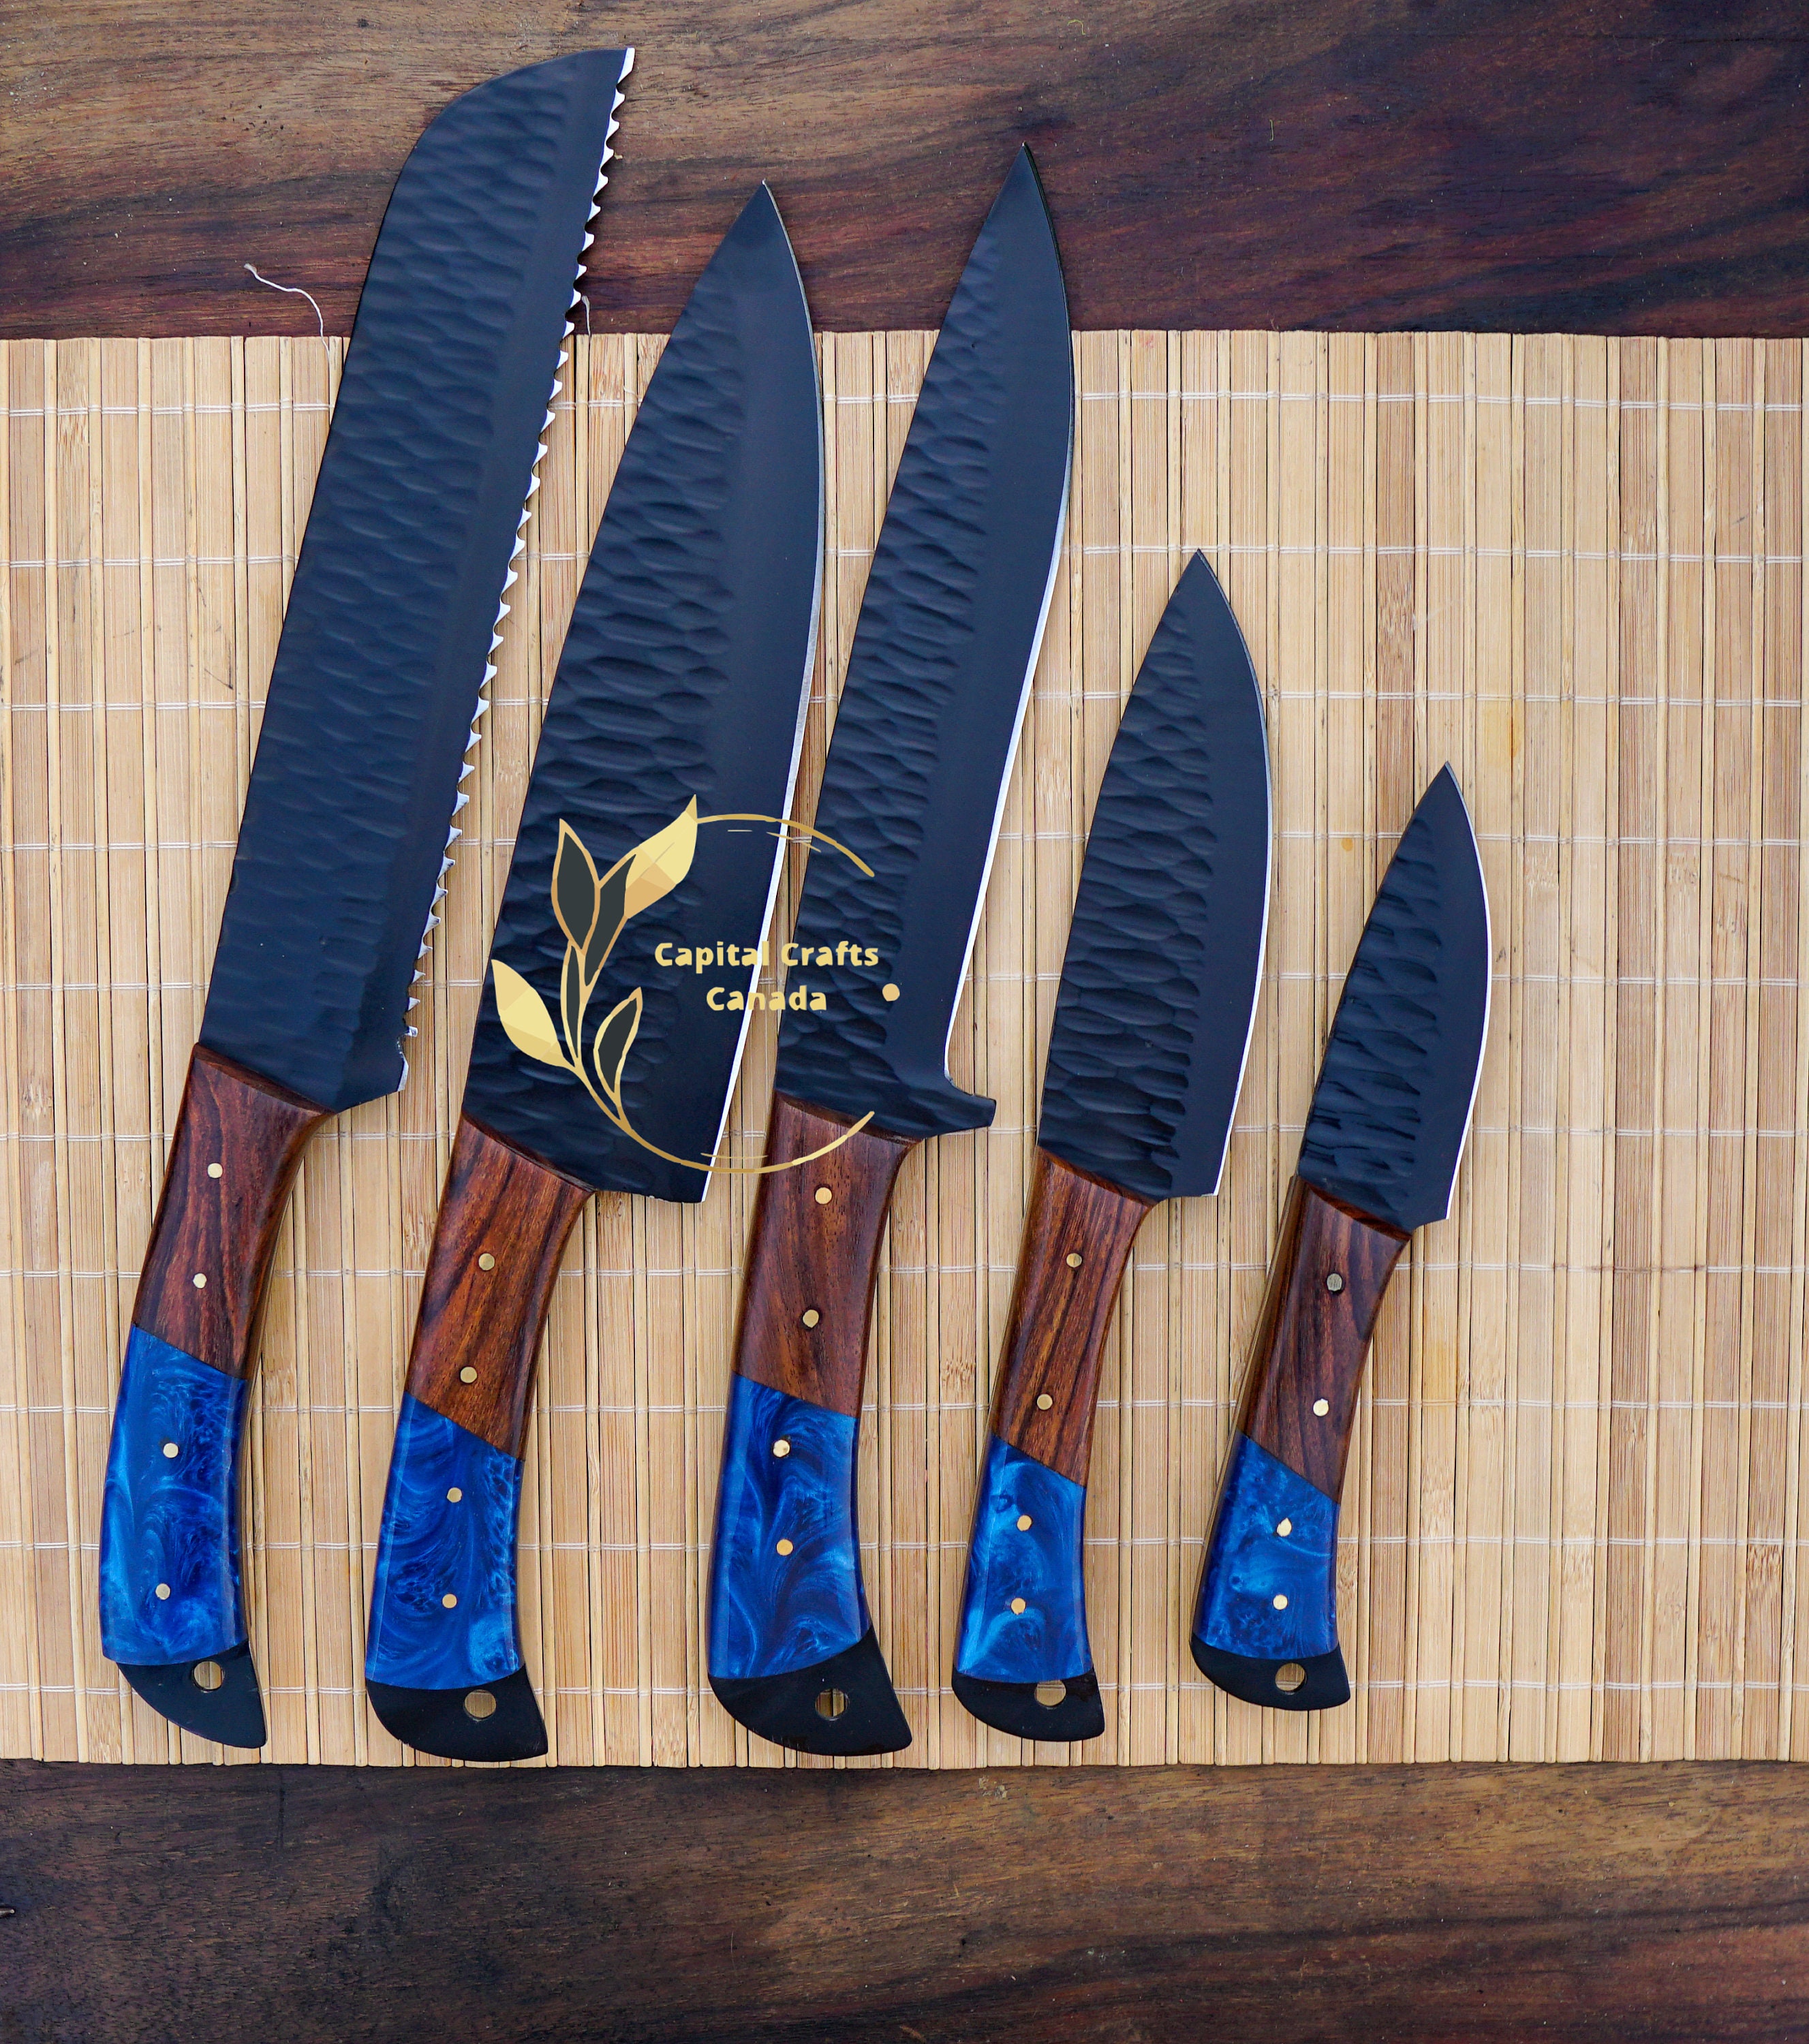 5 Pieces Damascus Steel Hammered Kitchen Knife Set, 2 Tone Black Dollar Wood Scale, 36 Inches Steel Sharp Knives, Custom Made Hand Forged Hammered